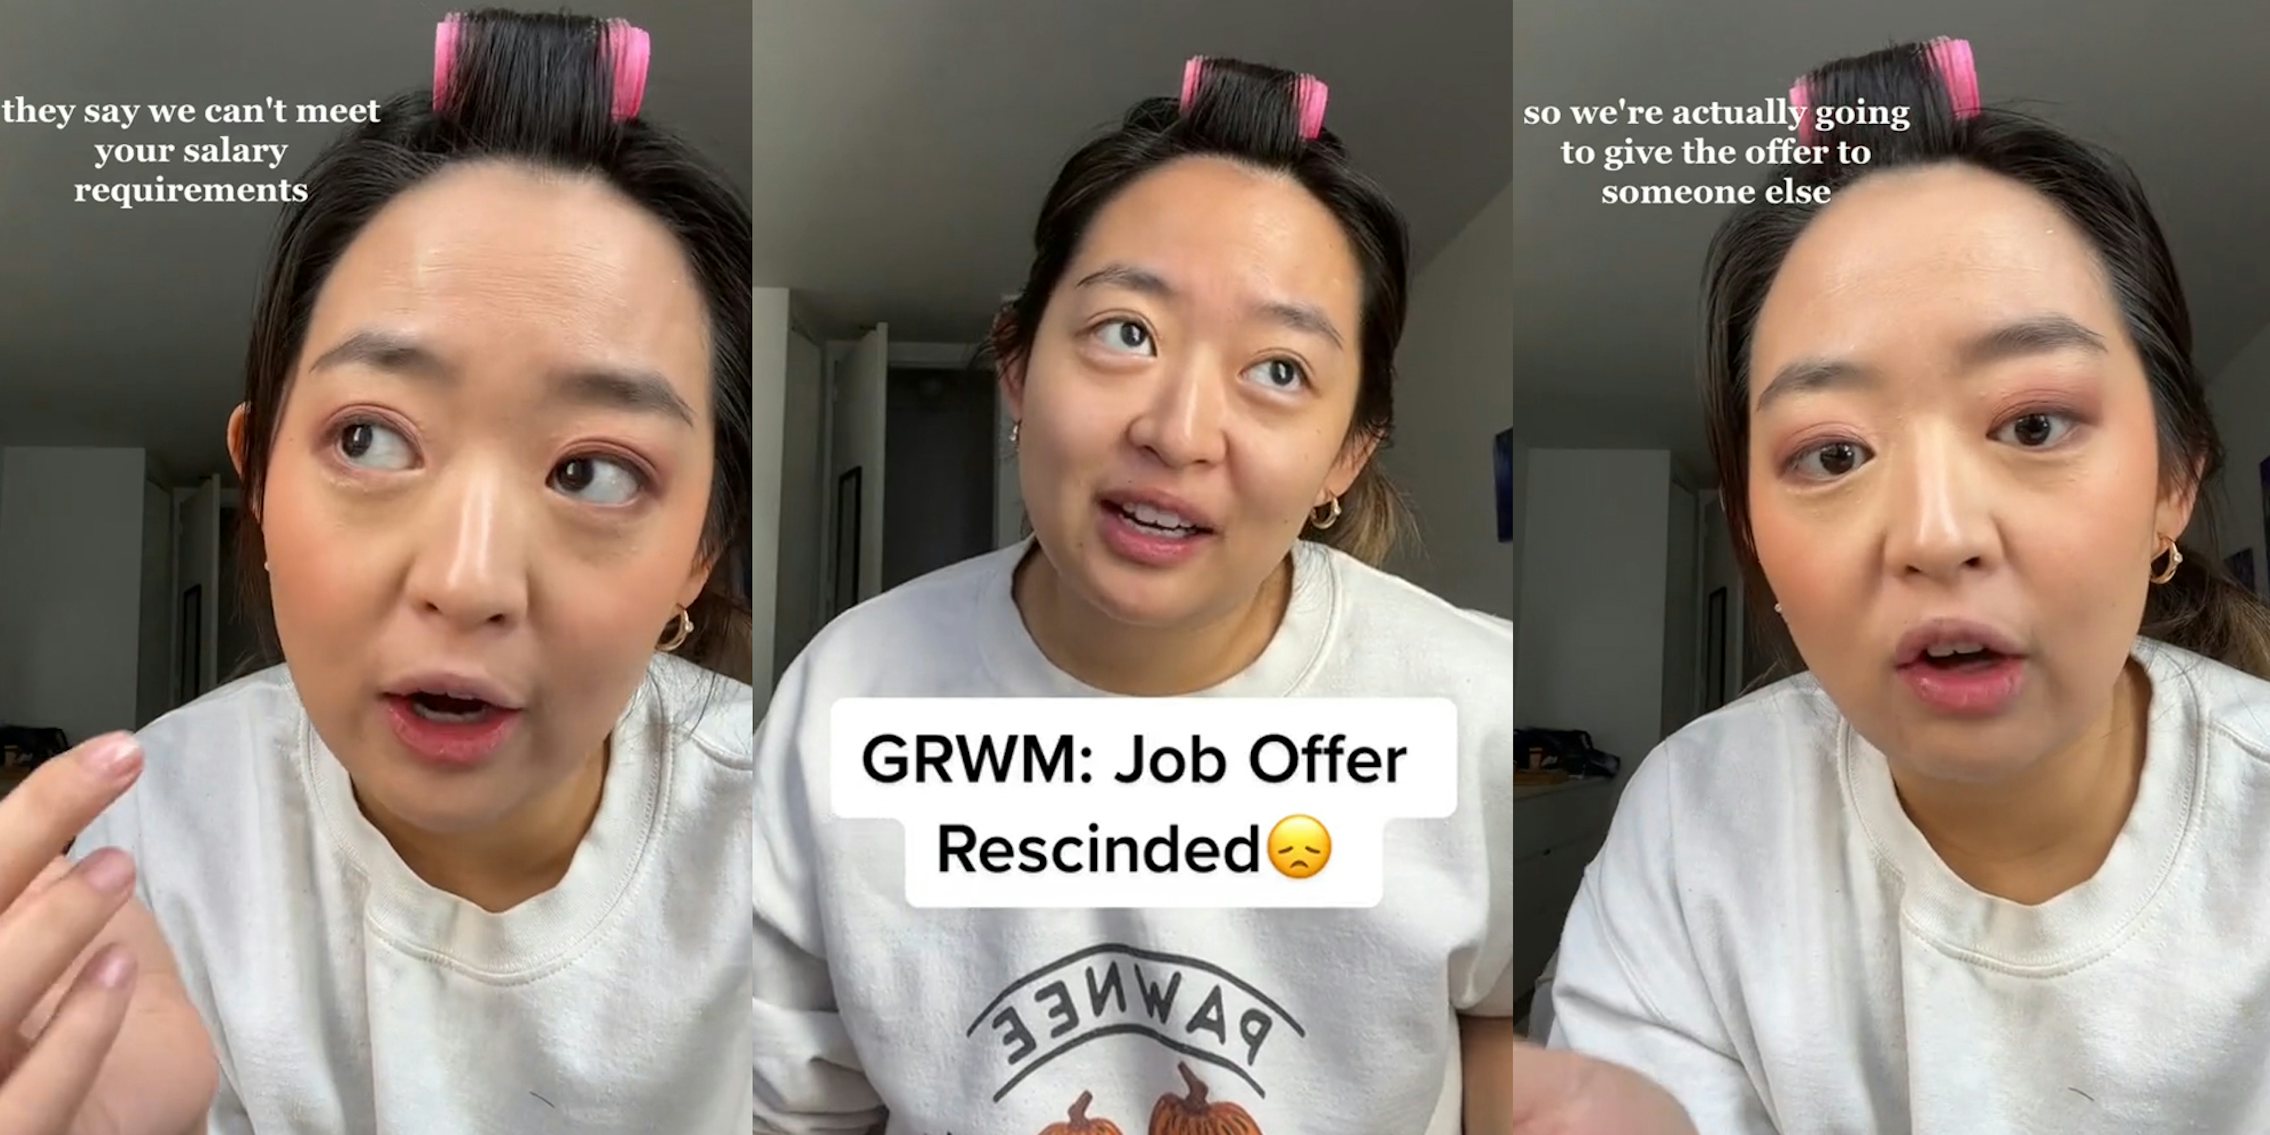 woman getting ready and speaking with caption 'they say we can't meet your salary requirements' (l) woman getting ready and speaking with caption 'GRWM: Job Offer Rescinded' (c) woman getting ready and speaking with caption 'so we're actually going to give the offer to someone else' (r)